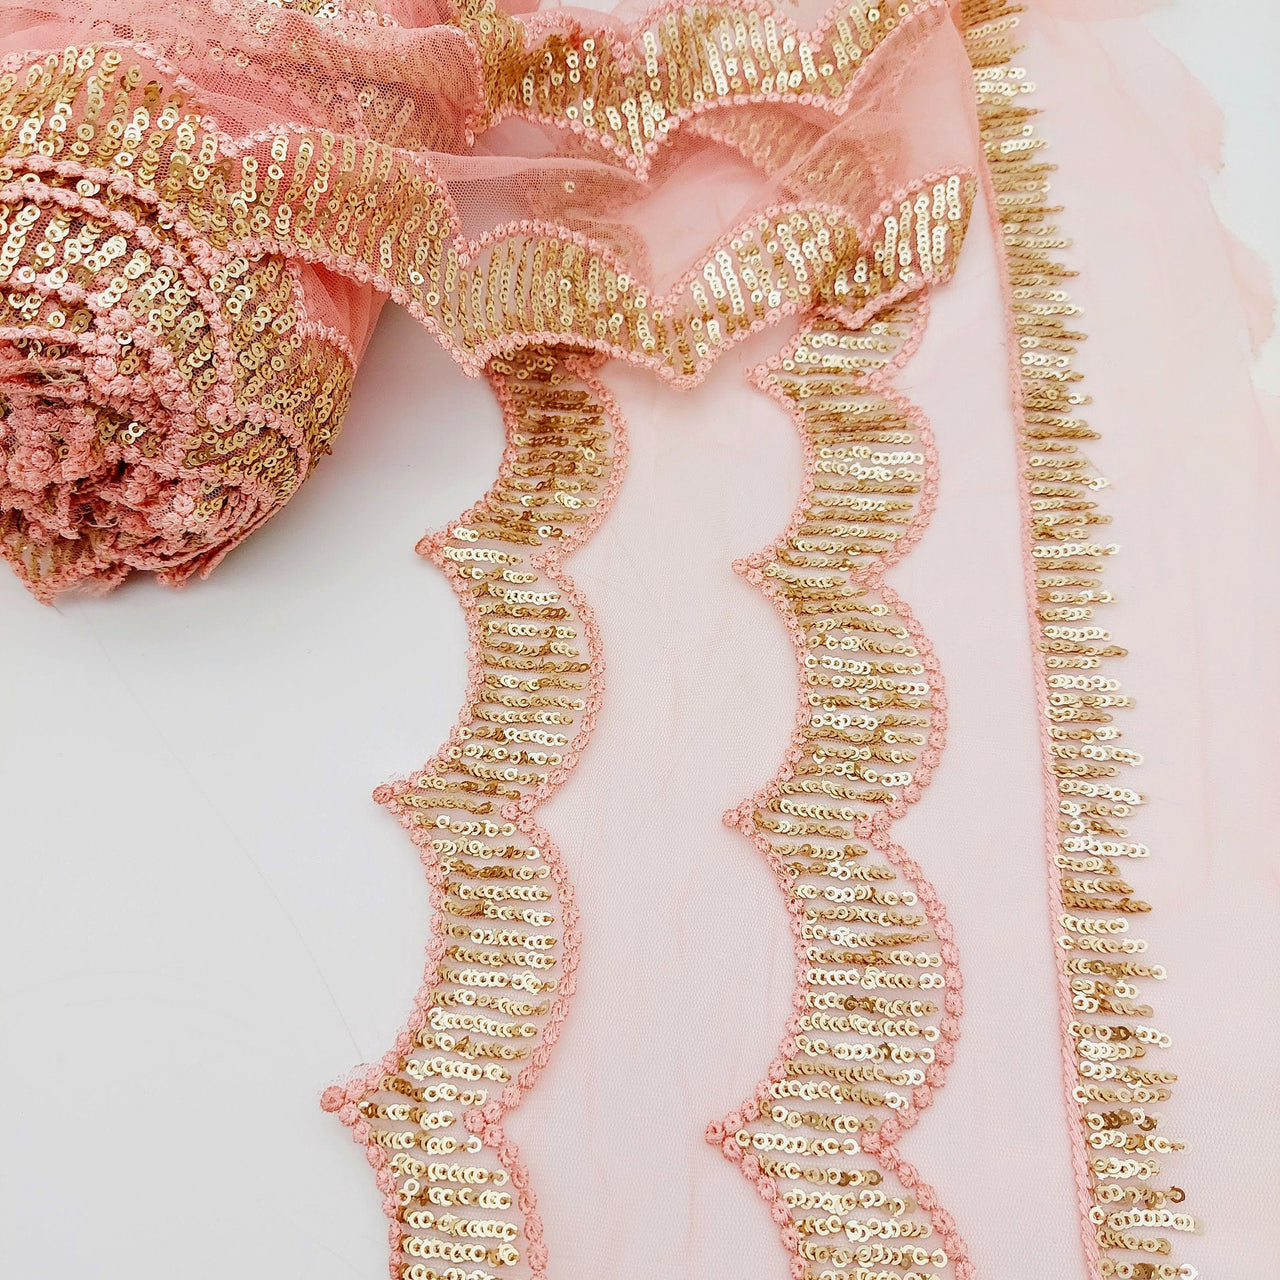 Salmon Pink Net Scallop Lace Trim with Gold Sequins, Sari Border, Embroidered Trim